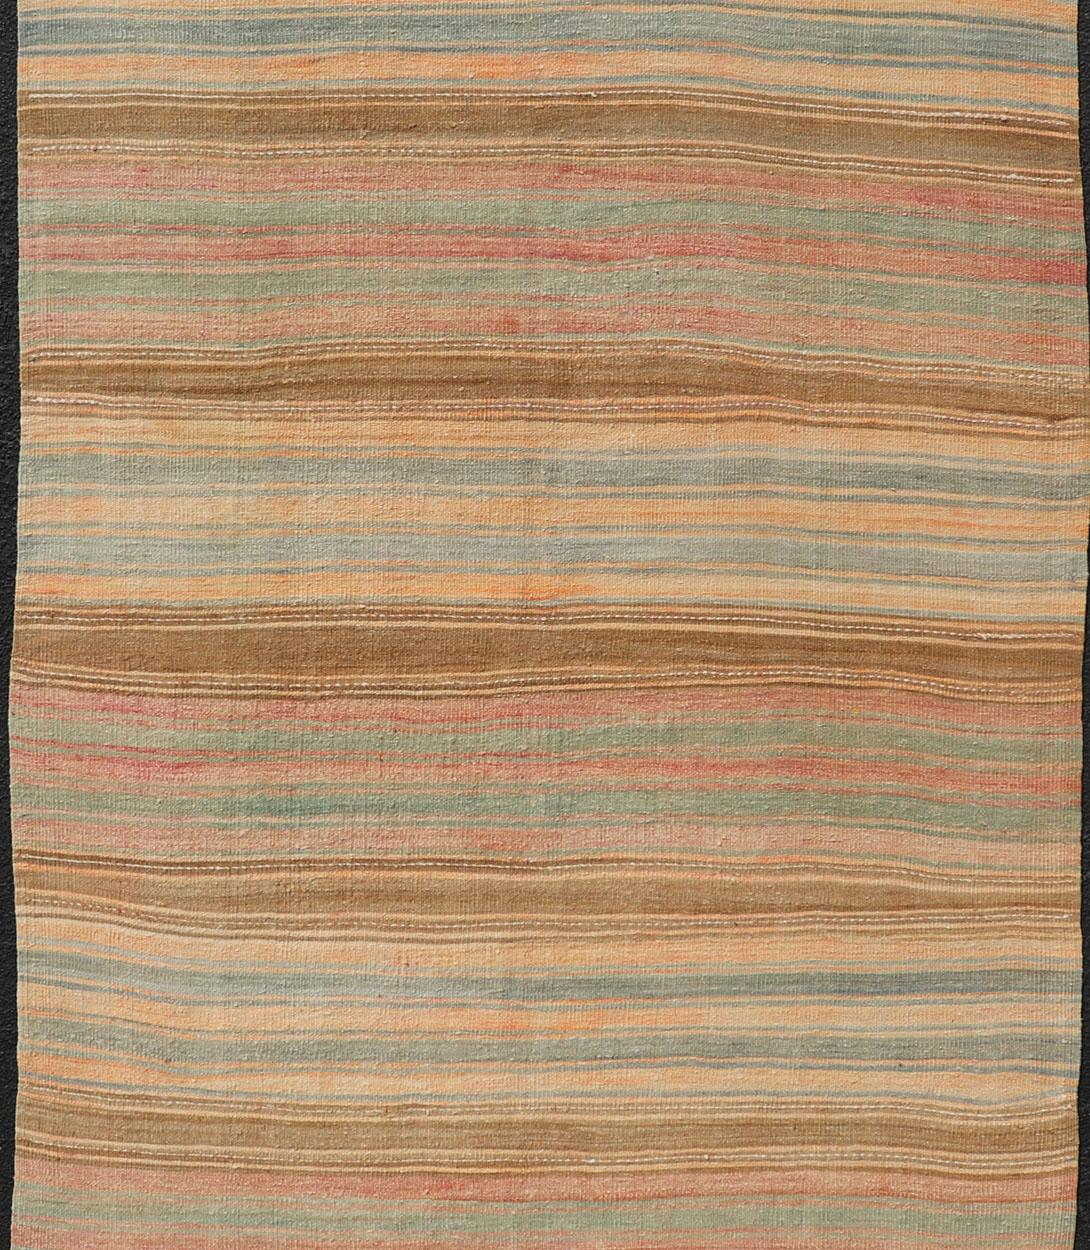 Hand-Woven Vintage Long Colorful Kilim Gallery Runner with Stripe Design in Multi Colors For Sale